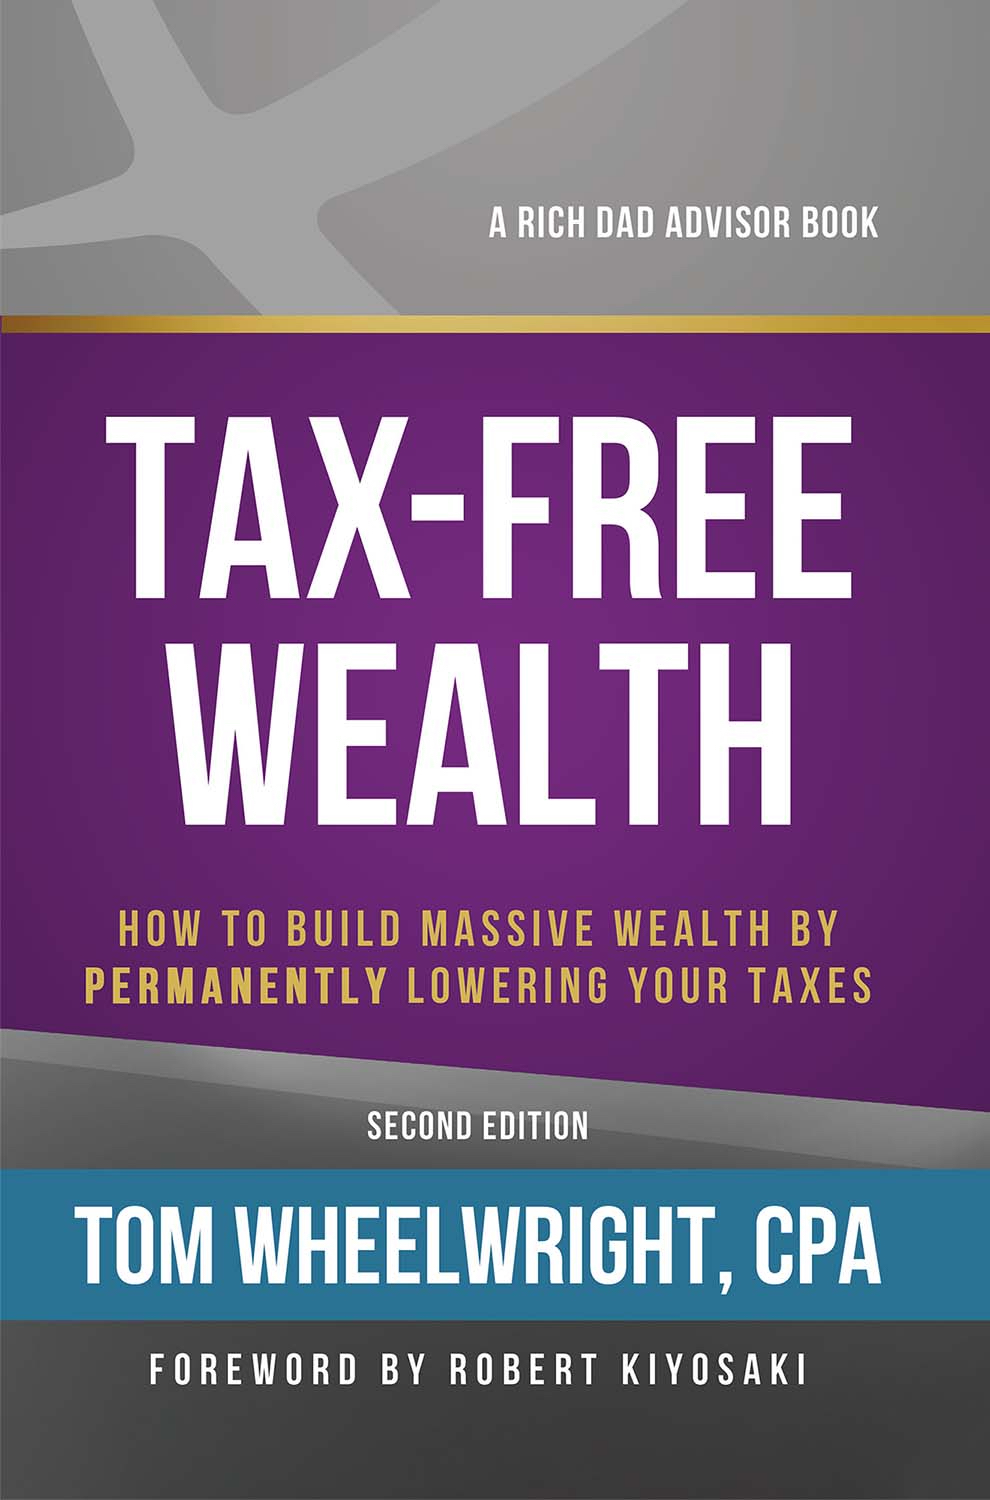 Tax-Free Wealth 2nd Edition (2018) is an Amazon bestseller by CPA Tom Wheelwright